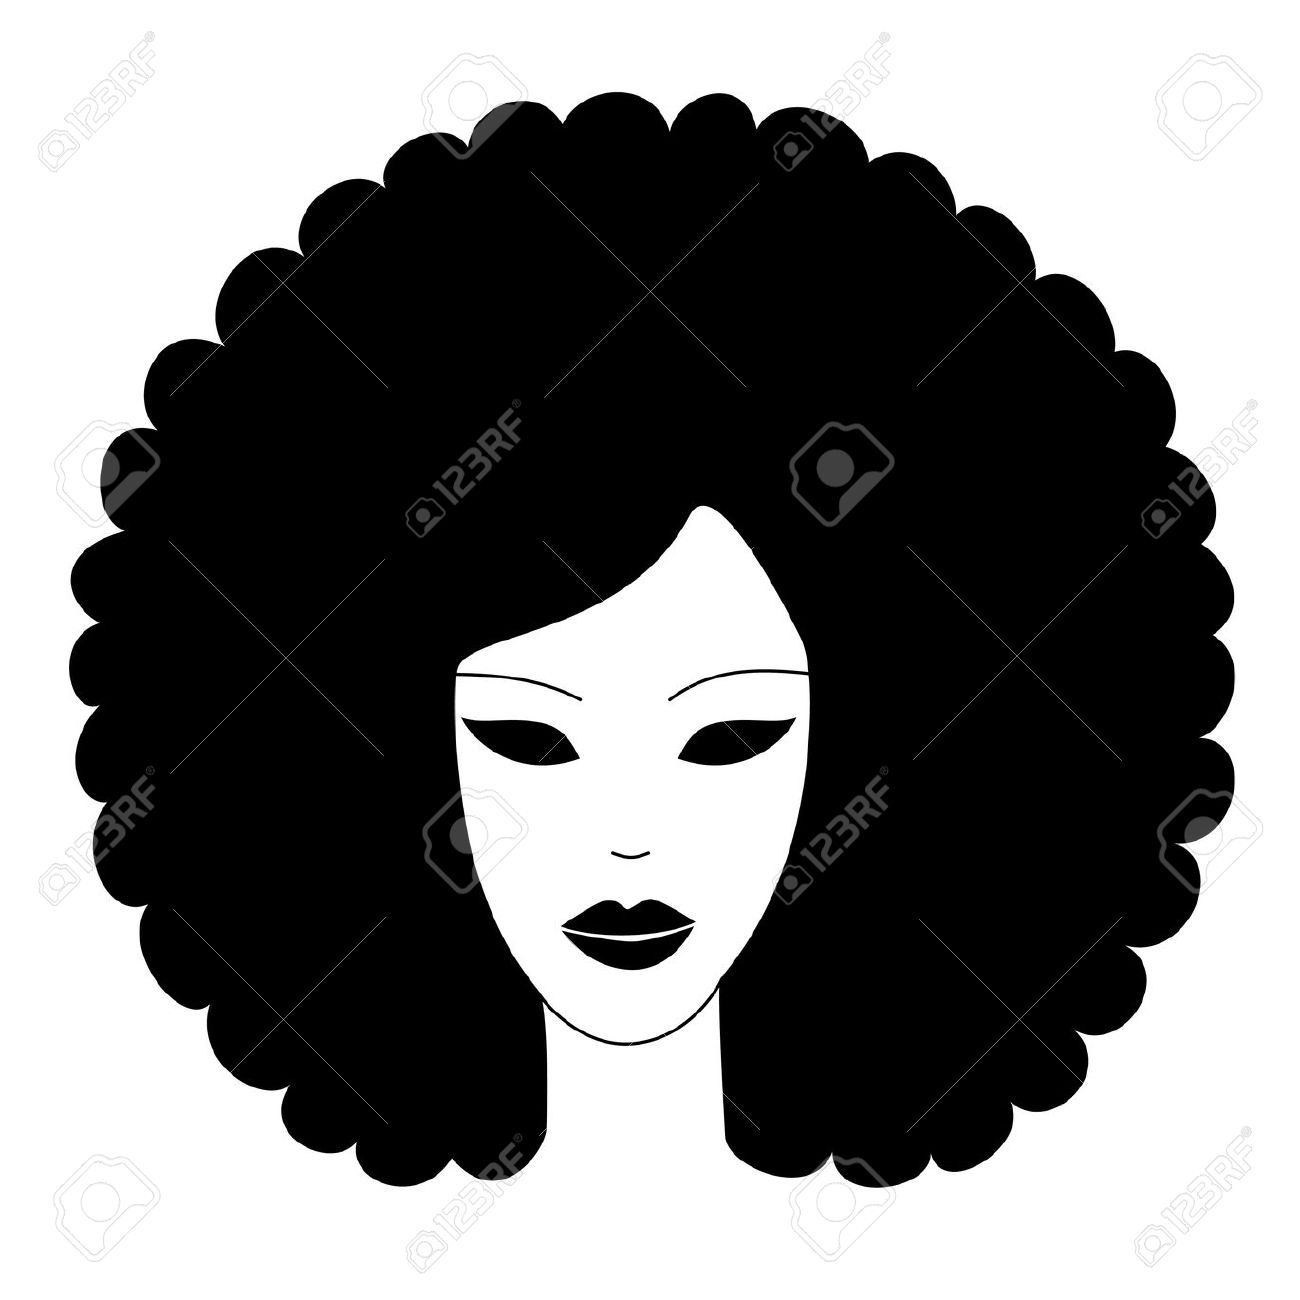 Afro Clipart Cliparts Co. afro: afro woman